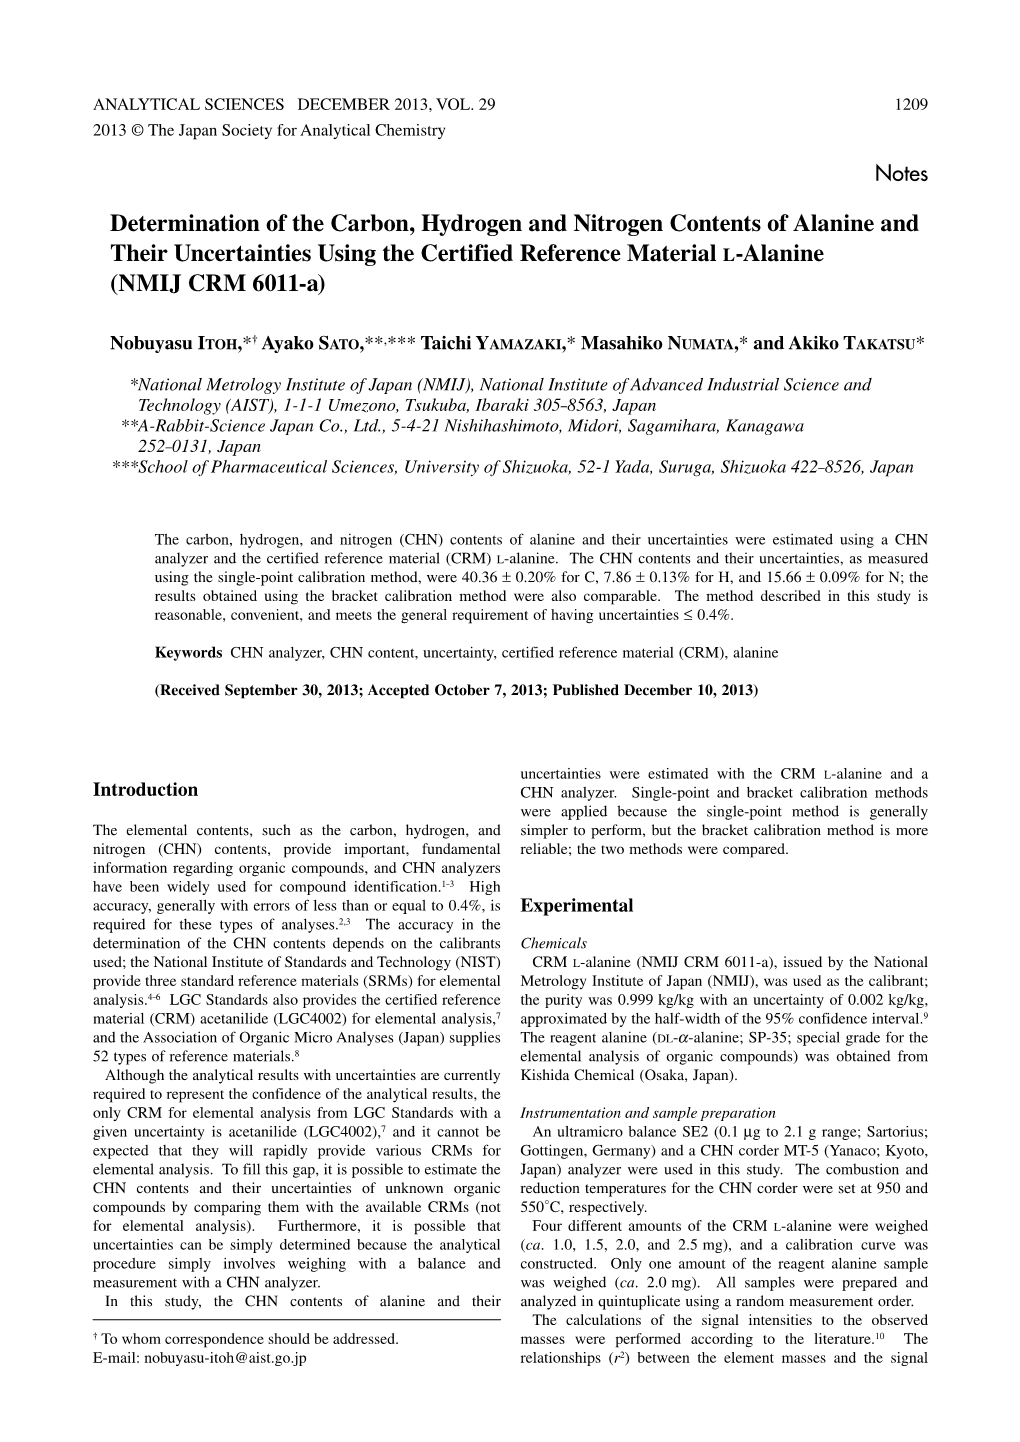 Determination of the Carbon, Hydrogen and Nitrogen Contents of Alanine and Their Uncertainties Using the Certified Reference Material L-Alanine (NMIJ CRM 6011-A)